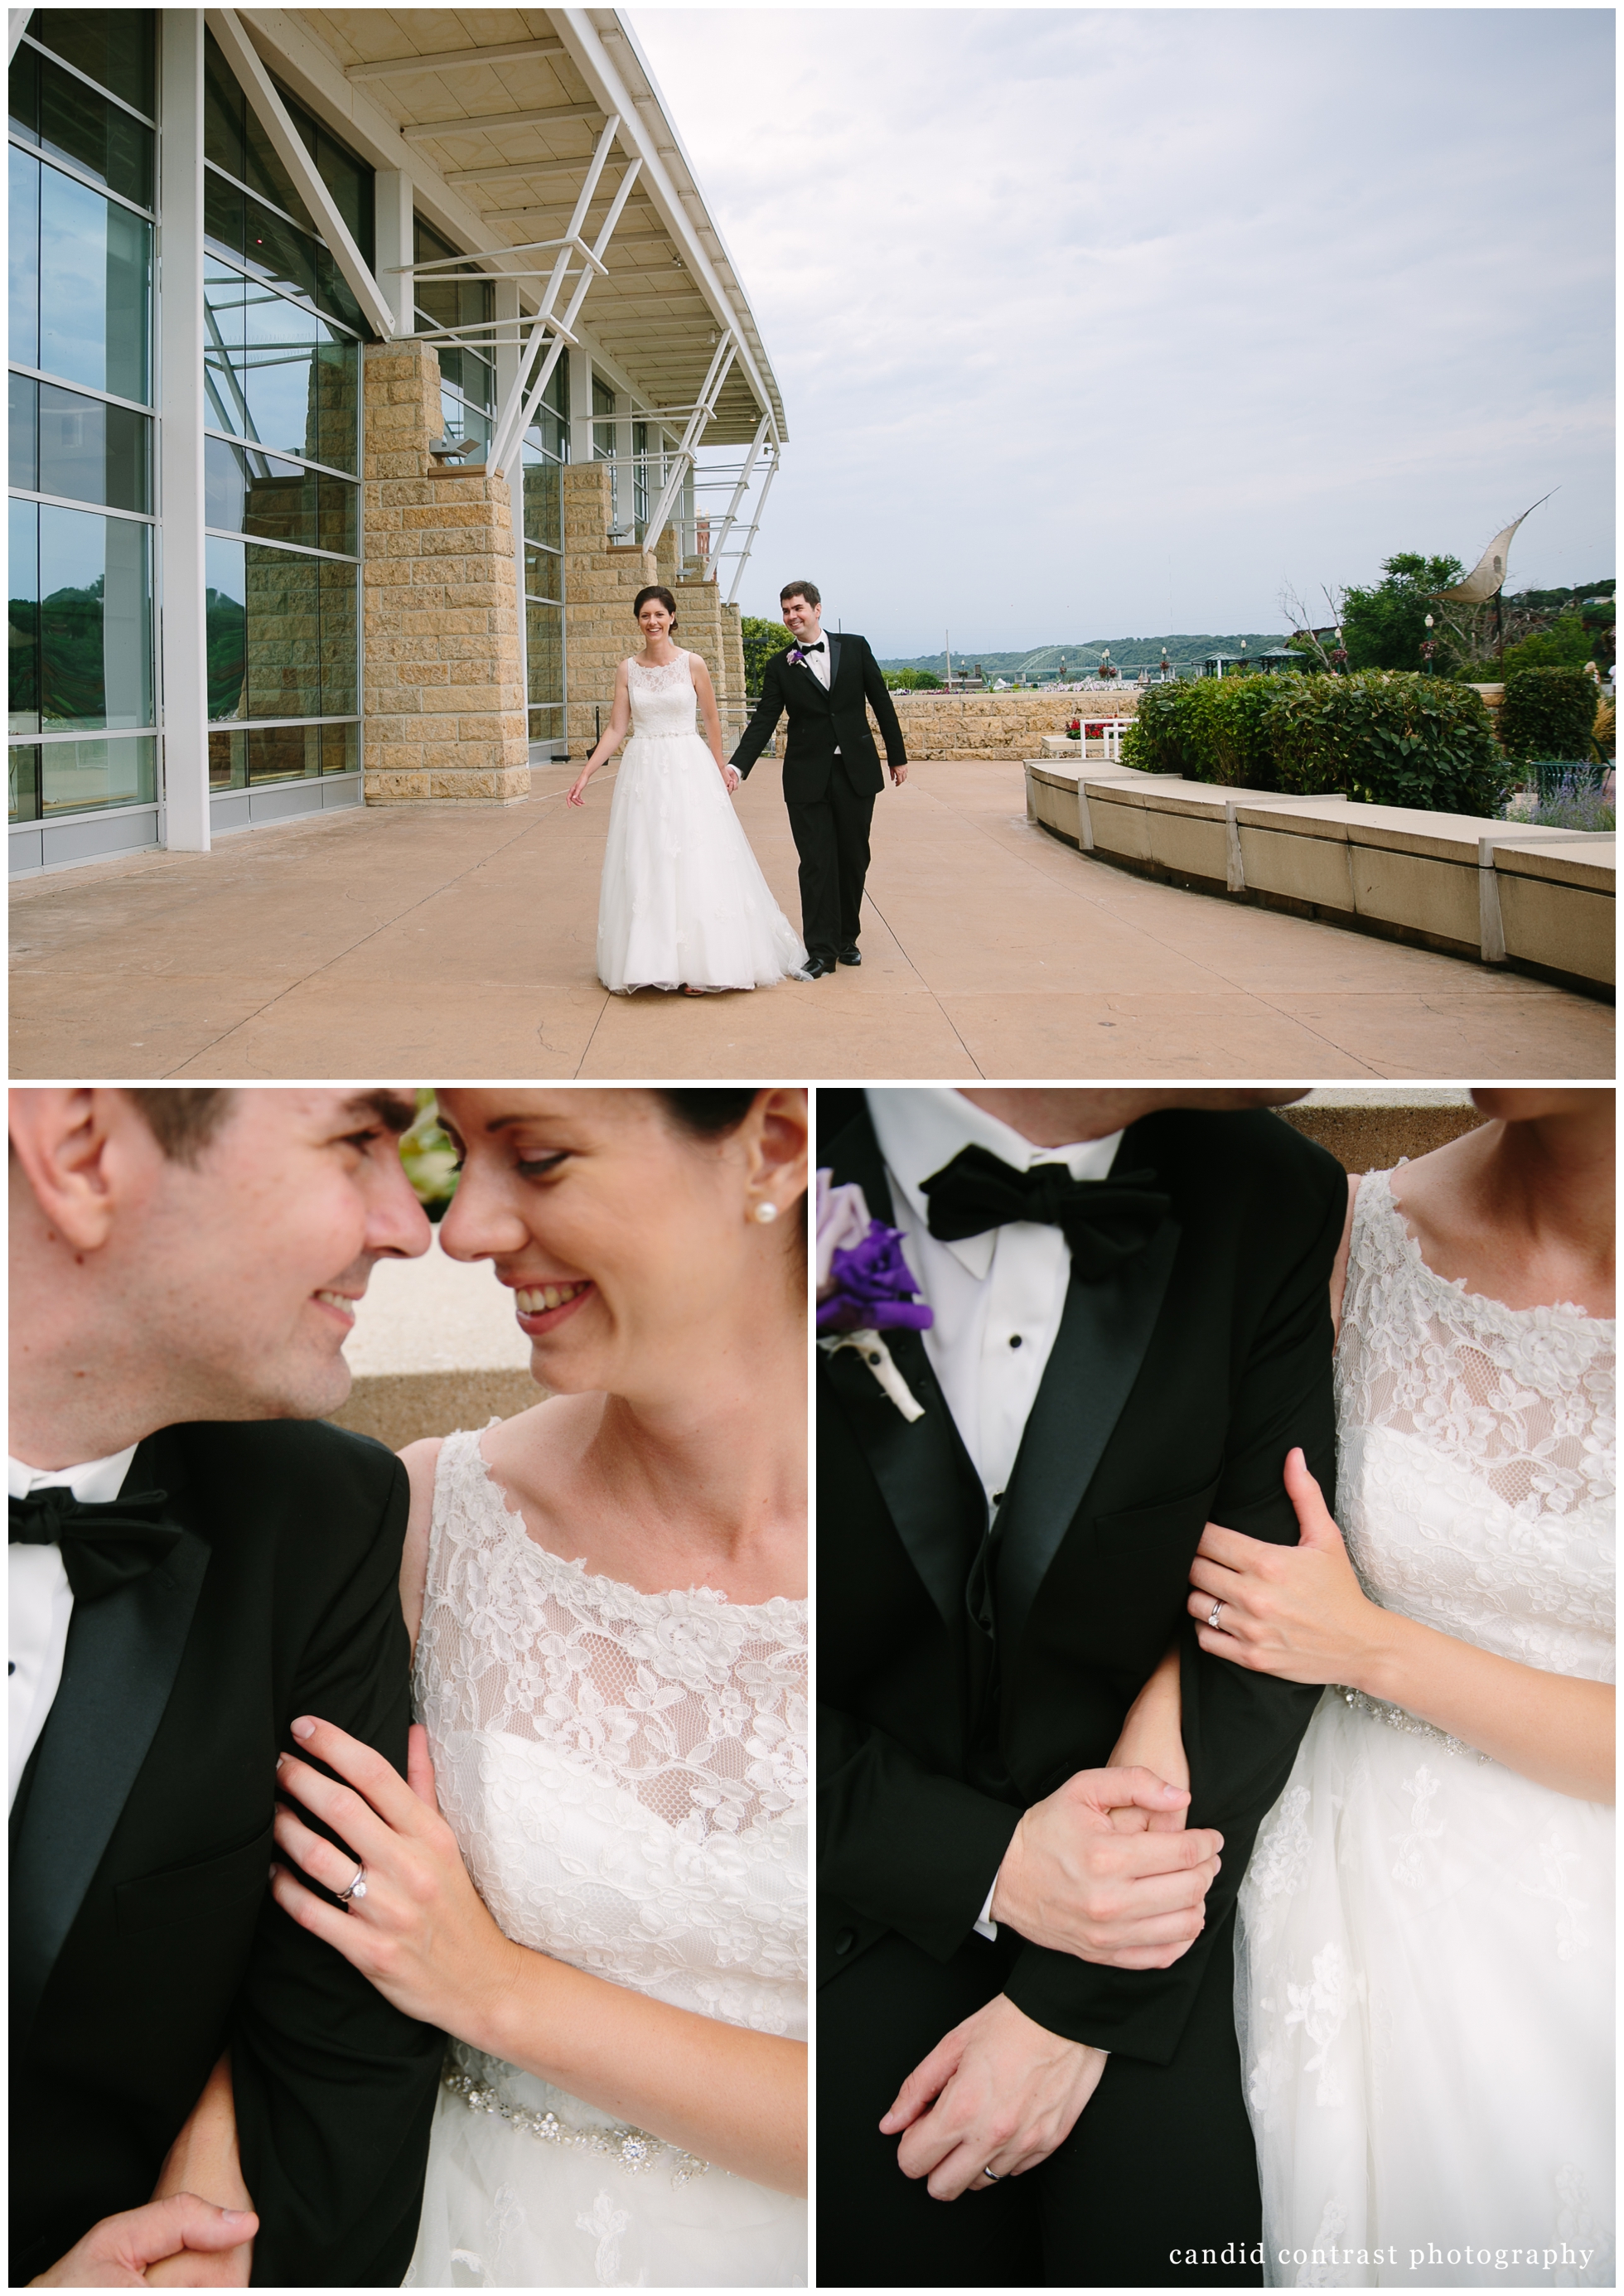 bride and groom at classic Dubuque iowa wedding at the grand river center, candid contrast photography